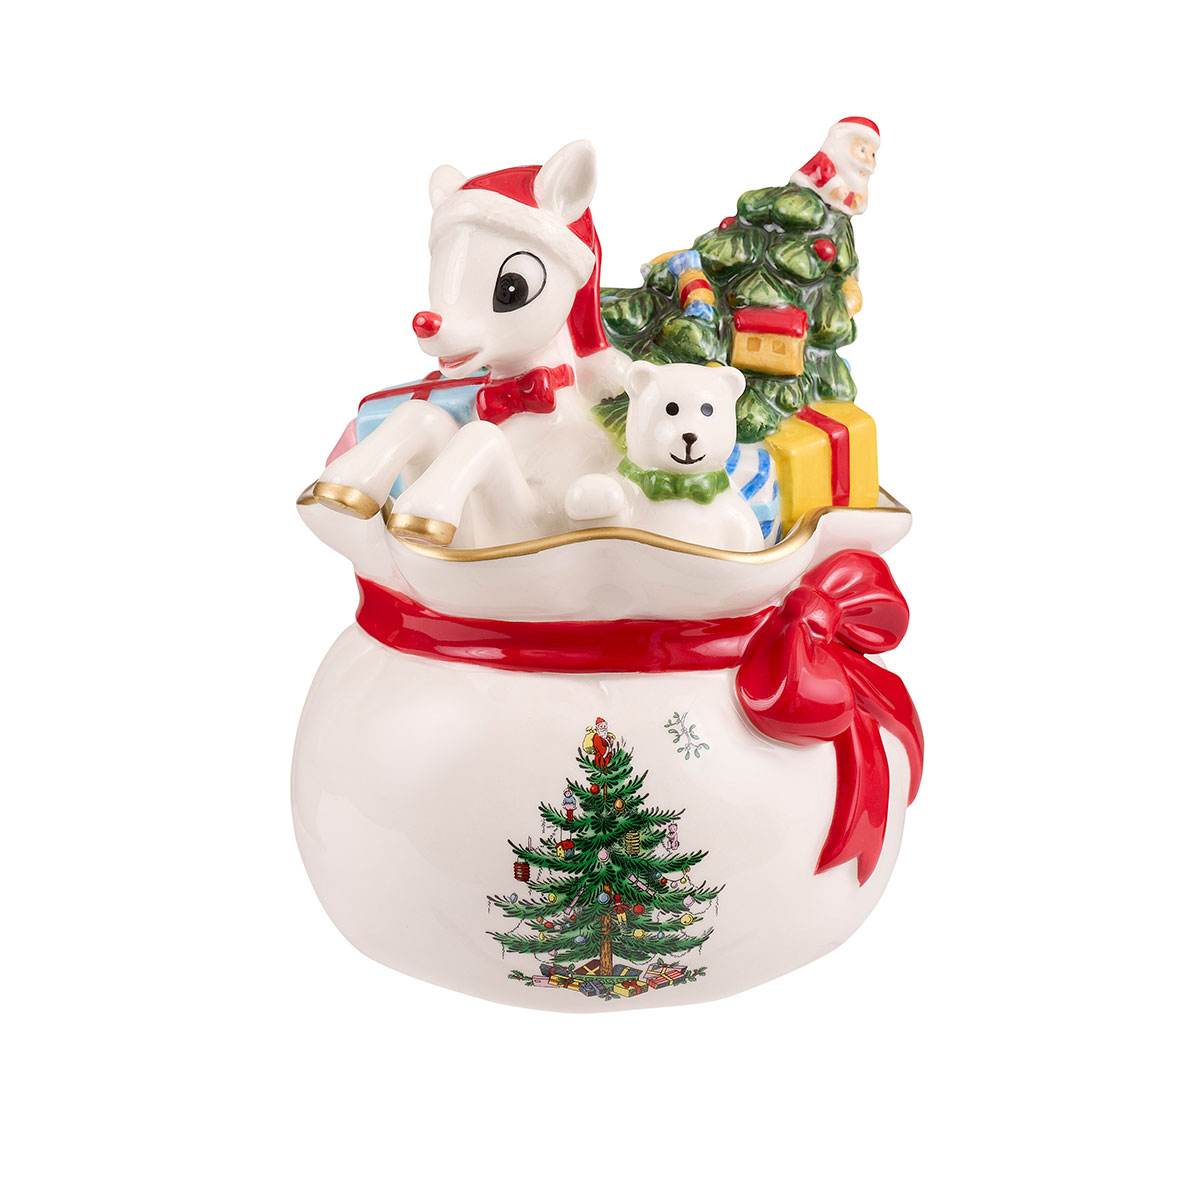 Spode Christmas Tree Rudolph Candy Bowl